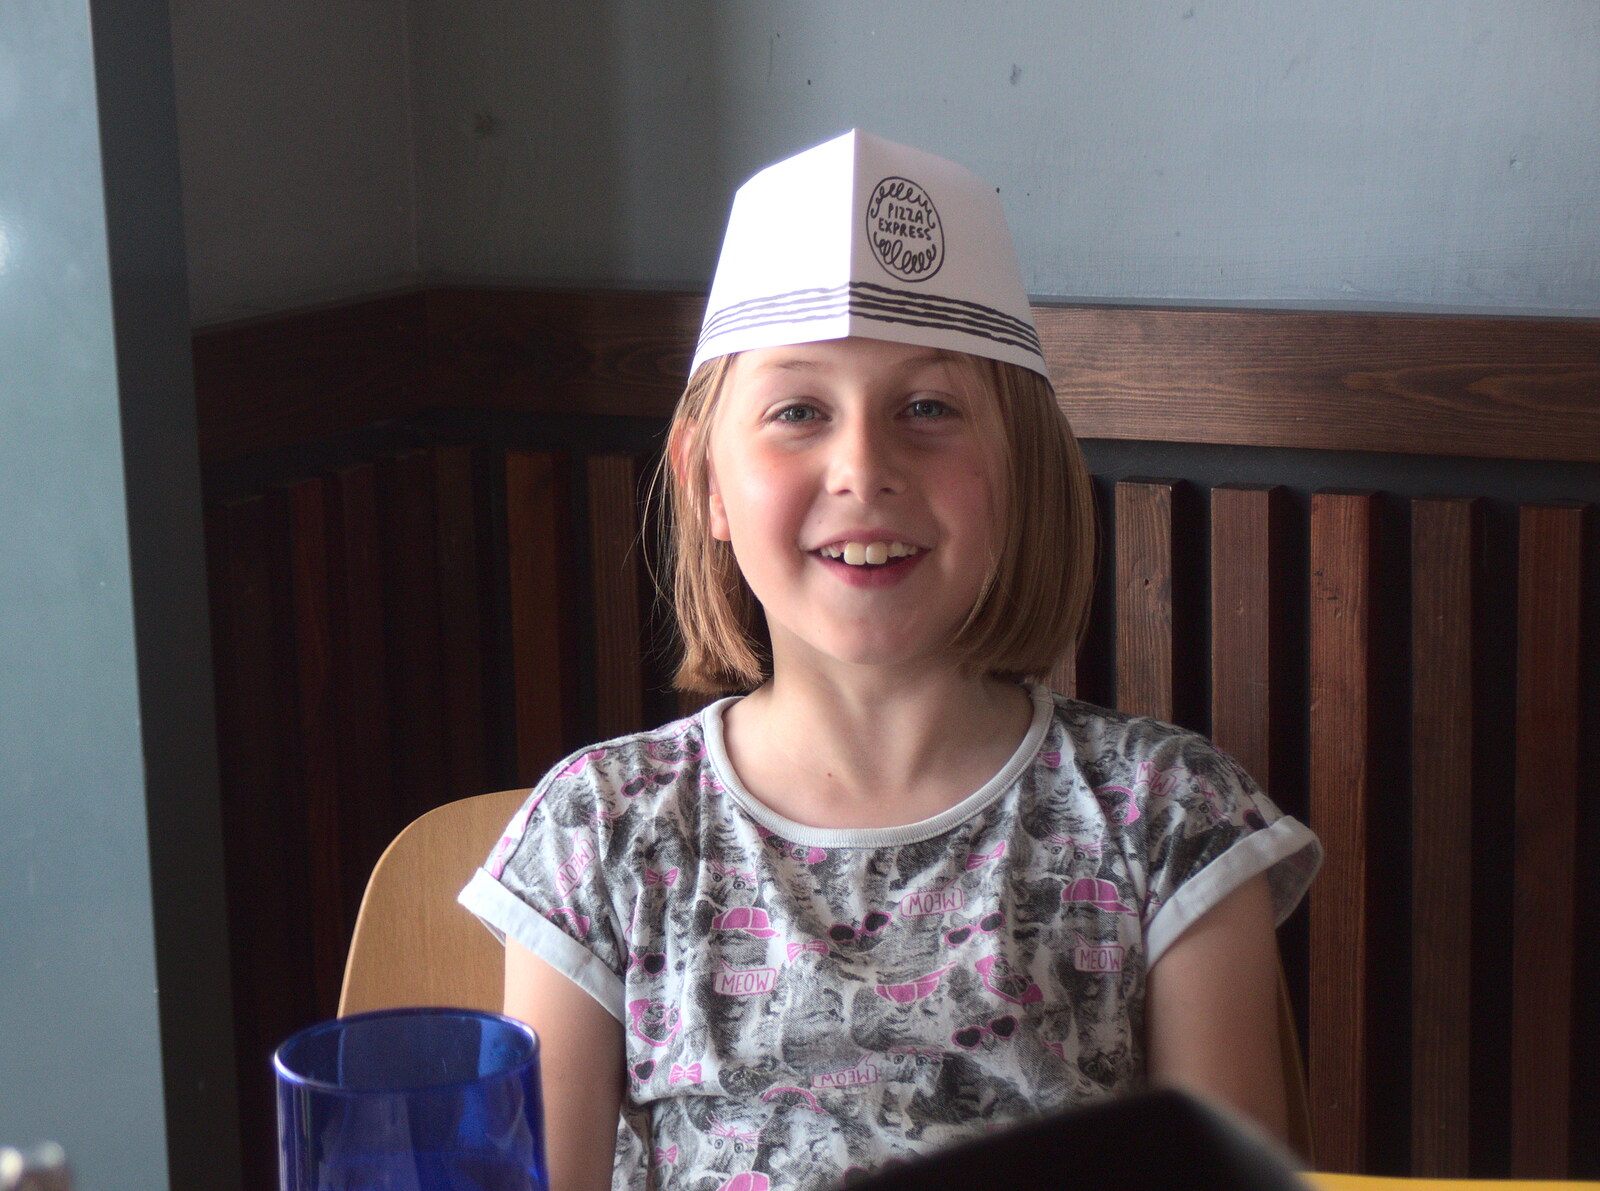 Soph the Roph with a pizzaola hat on from An Unexpected Birthday, Ipswich, Suffolk - 26th May 2018